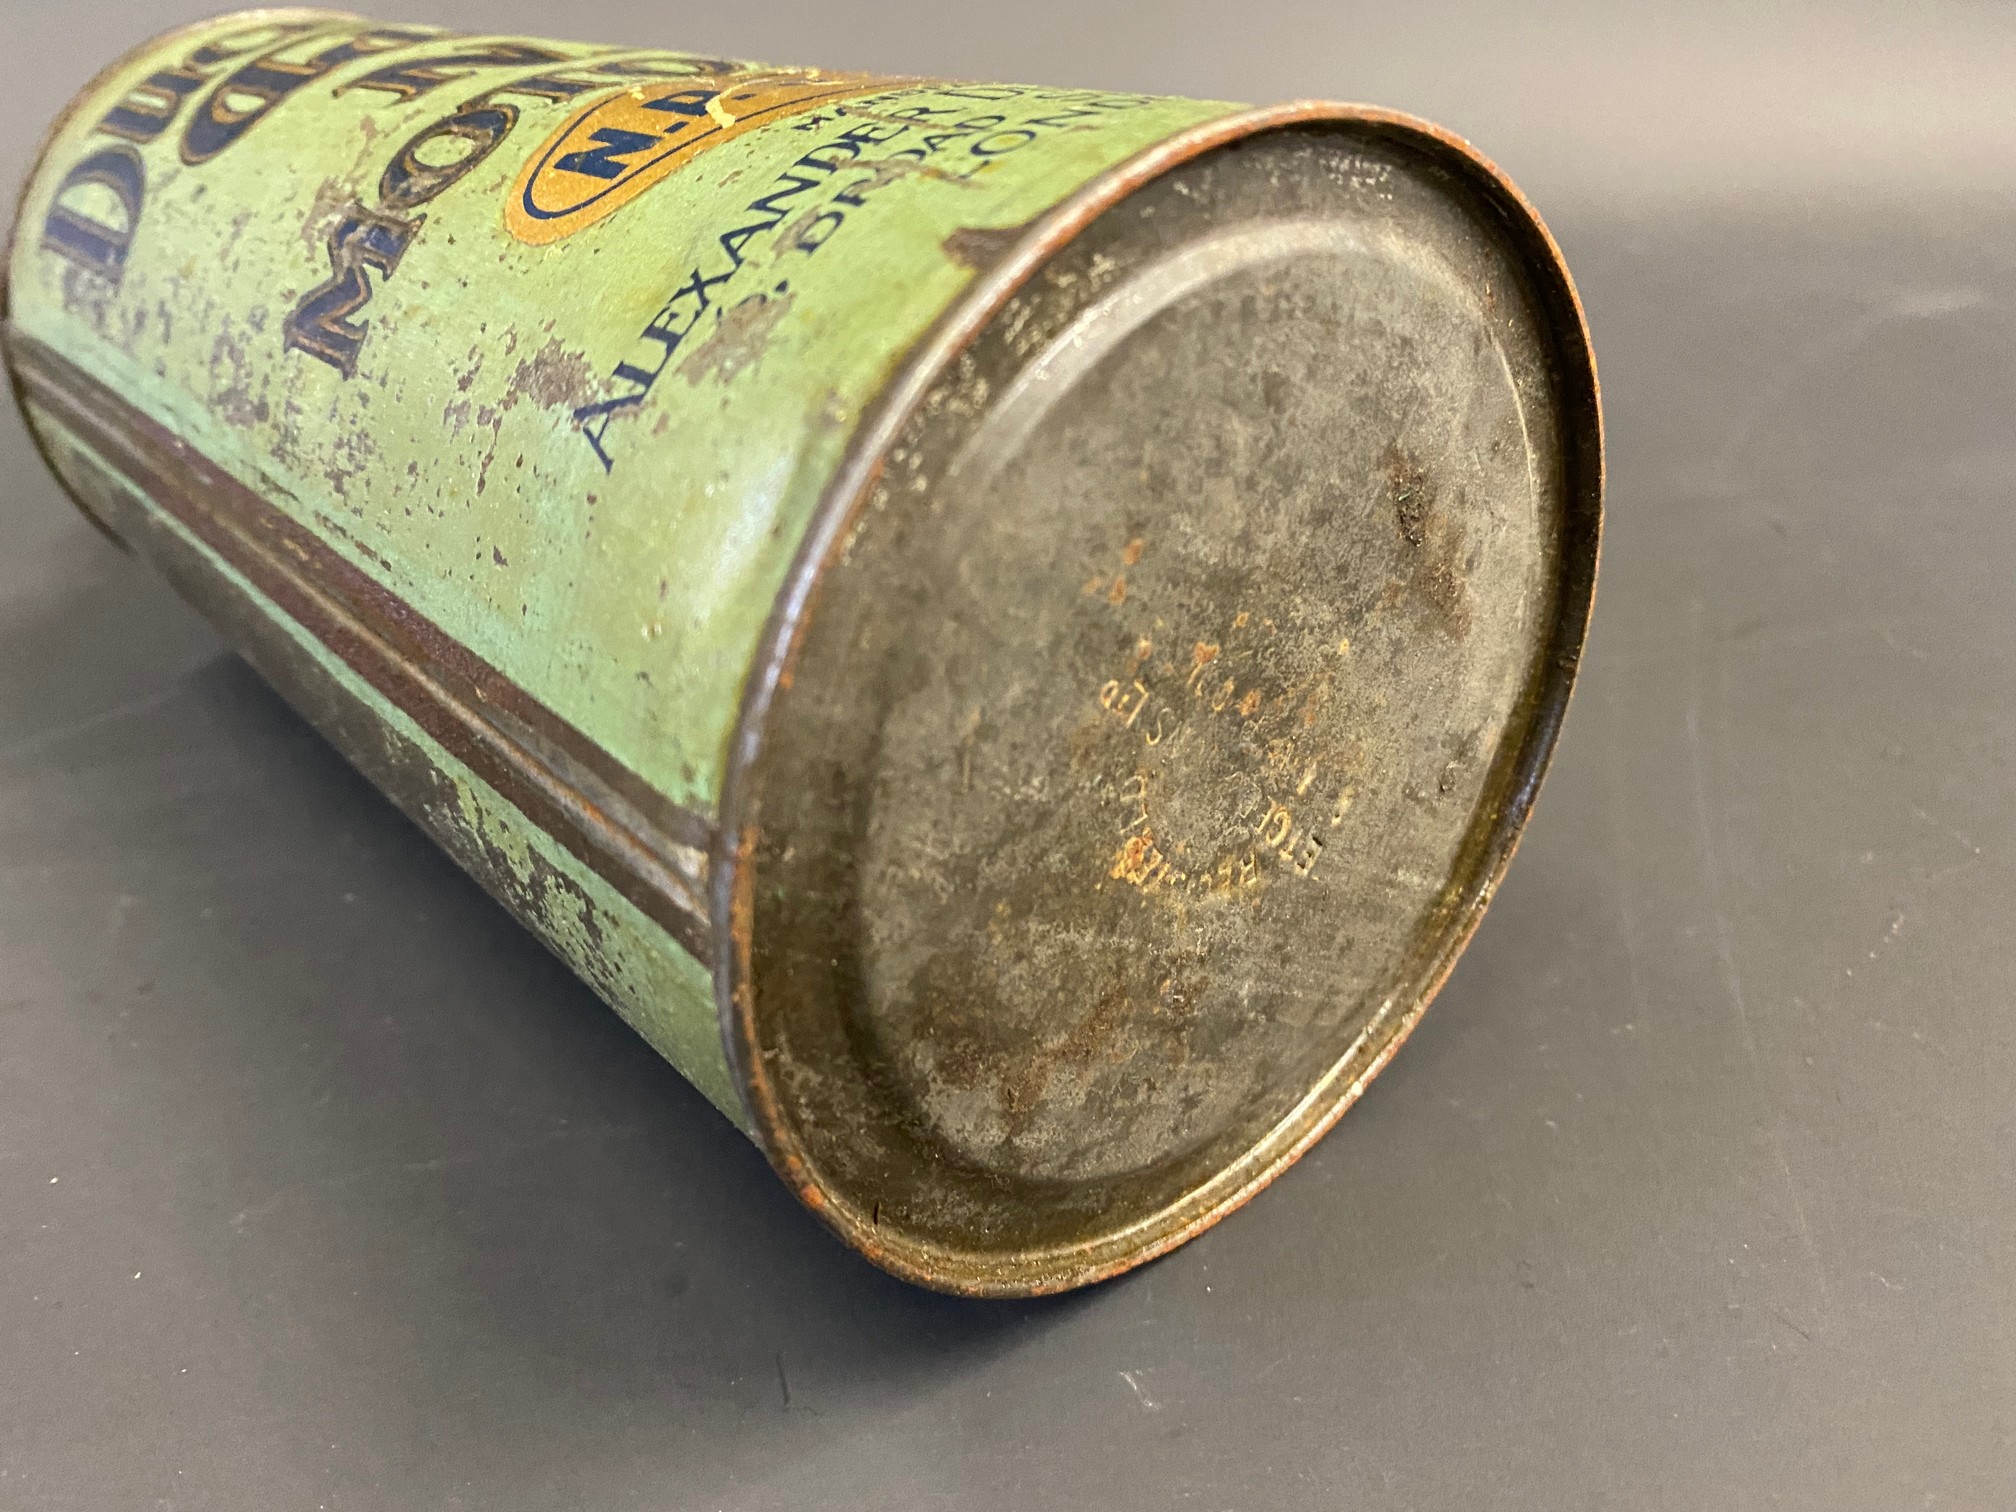 An early Duckham's Adcol N.P. Motor Oil Aero grade cylindrical quart can. - Image 6 of 6